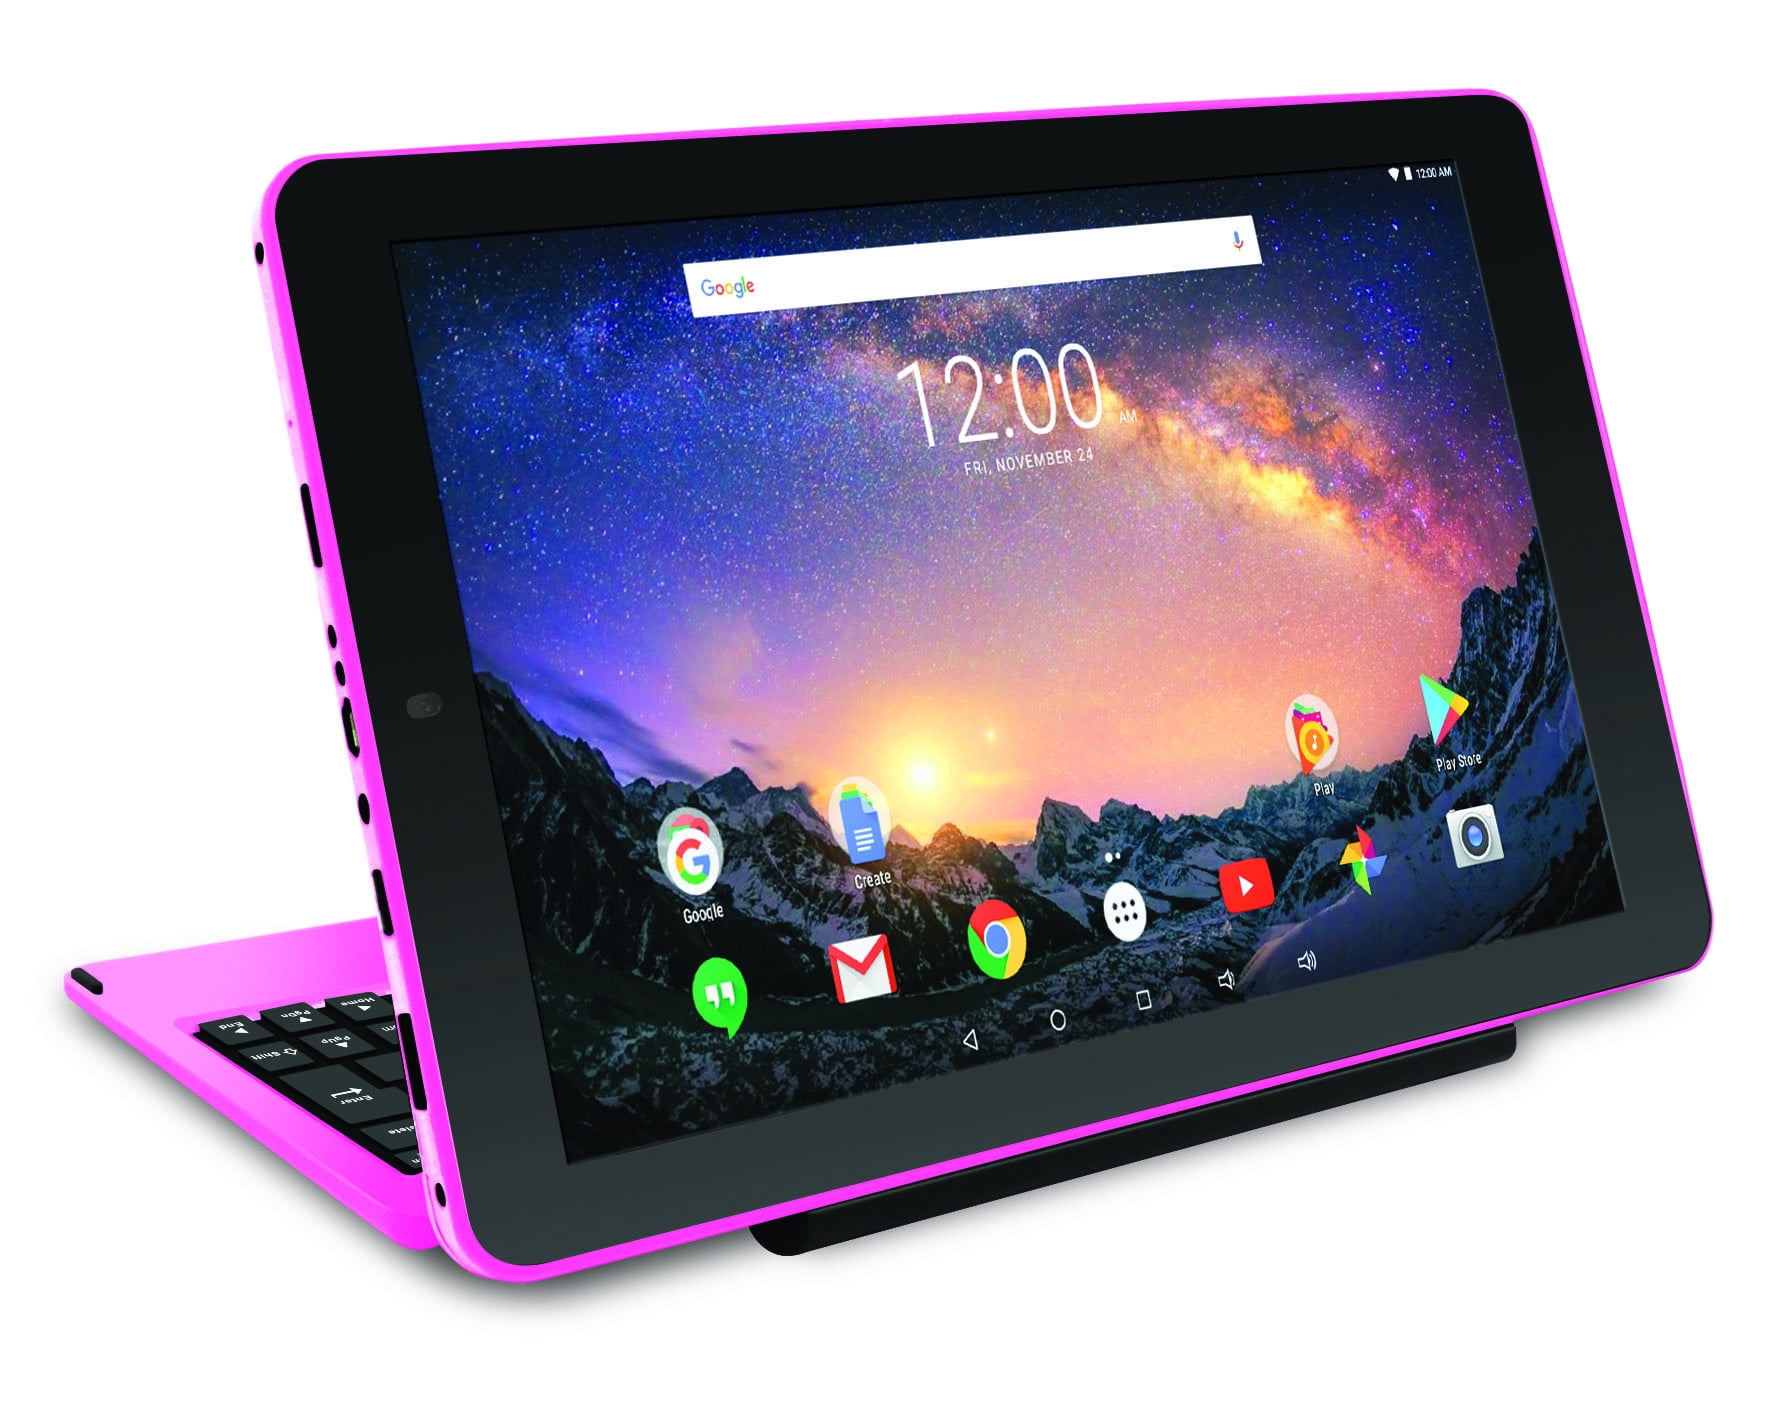 2018 RCA Galileo Pro 2-in-1 11.5 Touchscreen High Performance Tablet PC Intel Quad-Core Processor 32GB SSD 1GB RAM WIFI Bluetooth Webcam Detachable Keyboard Android 6.0 Pink Galileo Pro 11